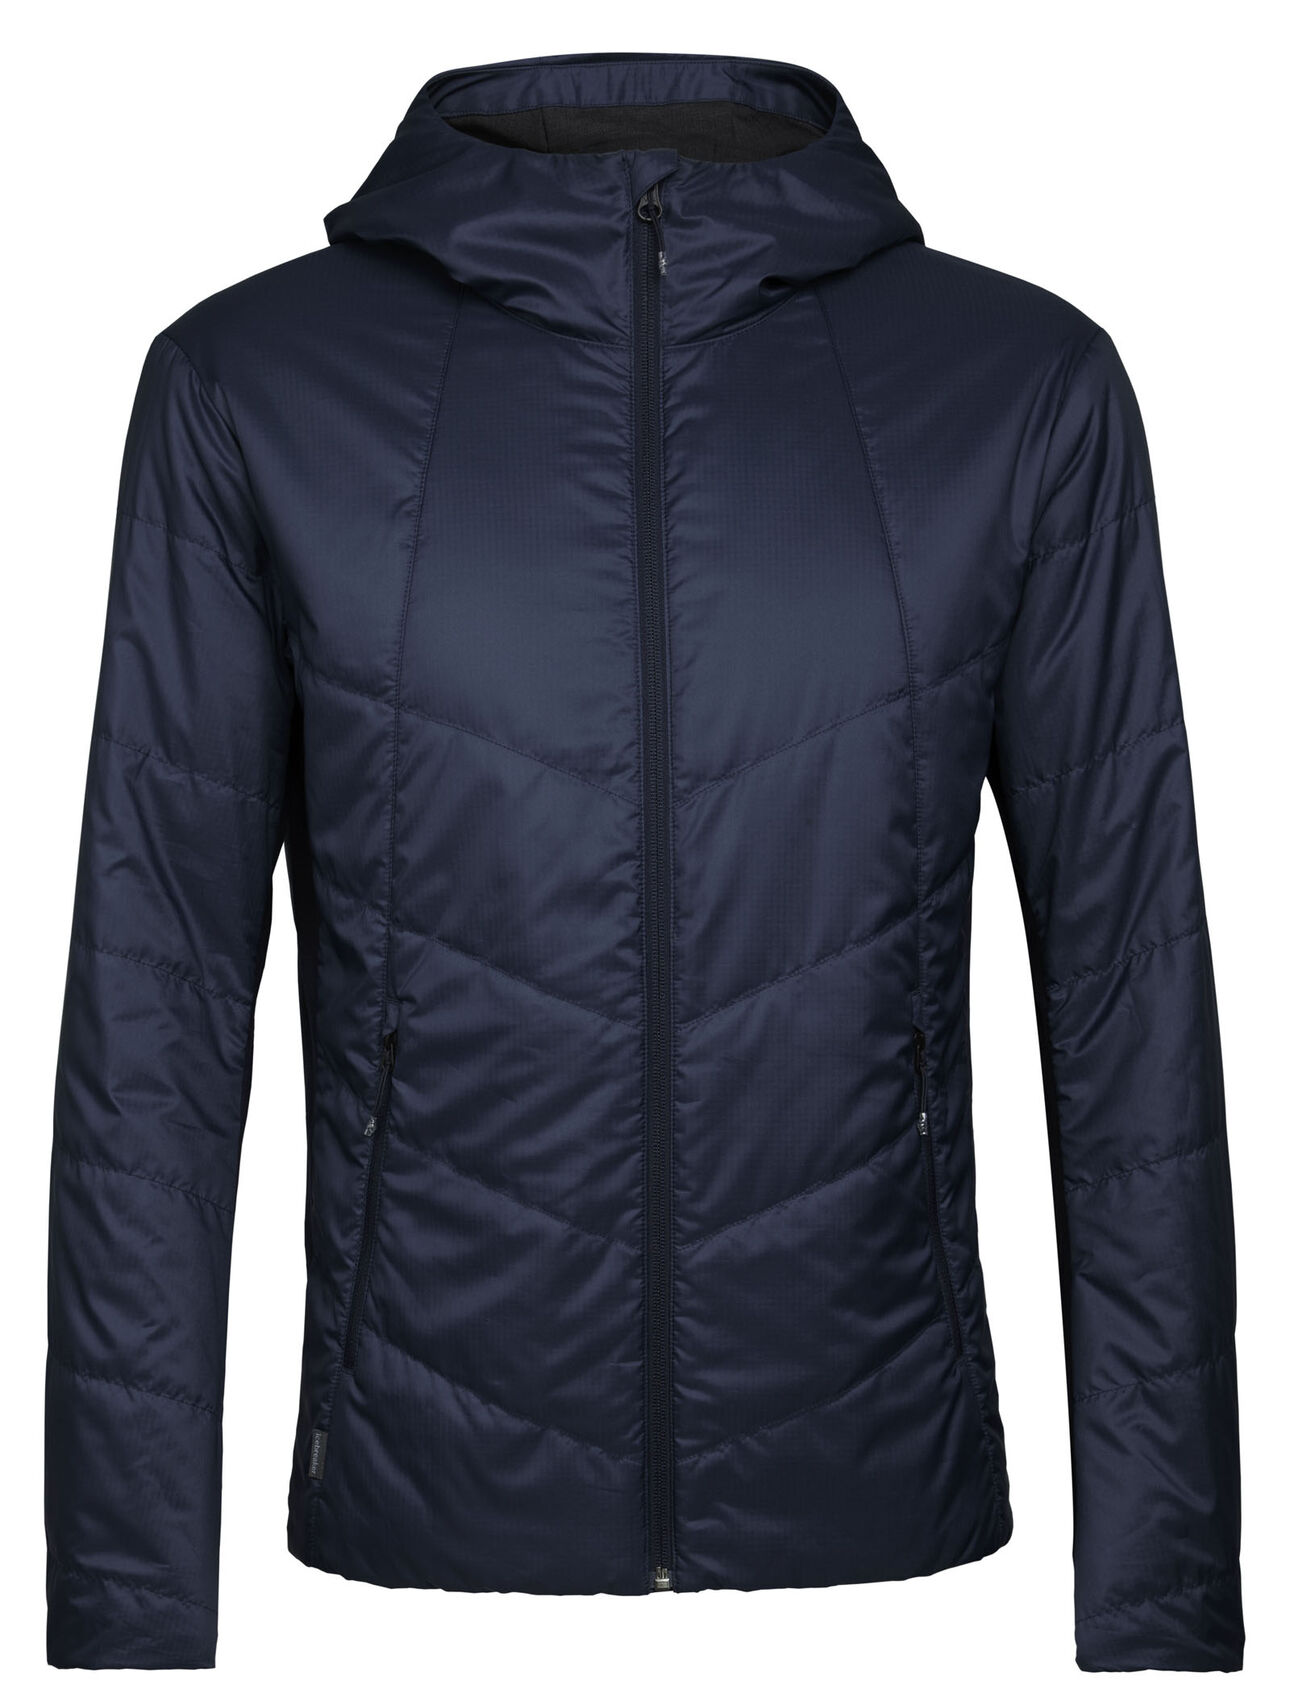 Mens MerinoLoft™ Helix Hooded Jacket A technical puffy made with sustainable merino wool and recycled materials, the Helix Hooded Jacket is a warm winter mid layer for everyday versatility.